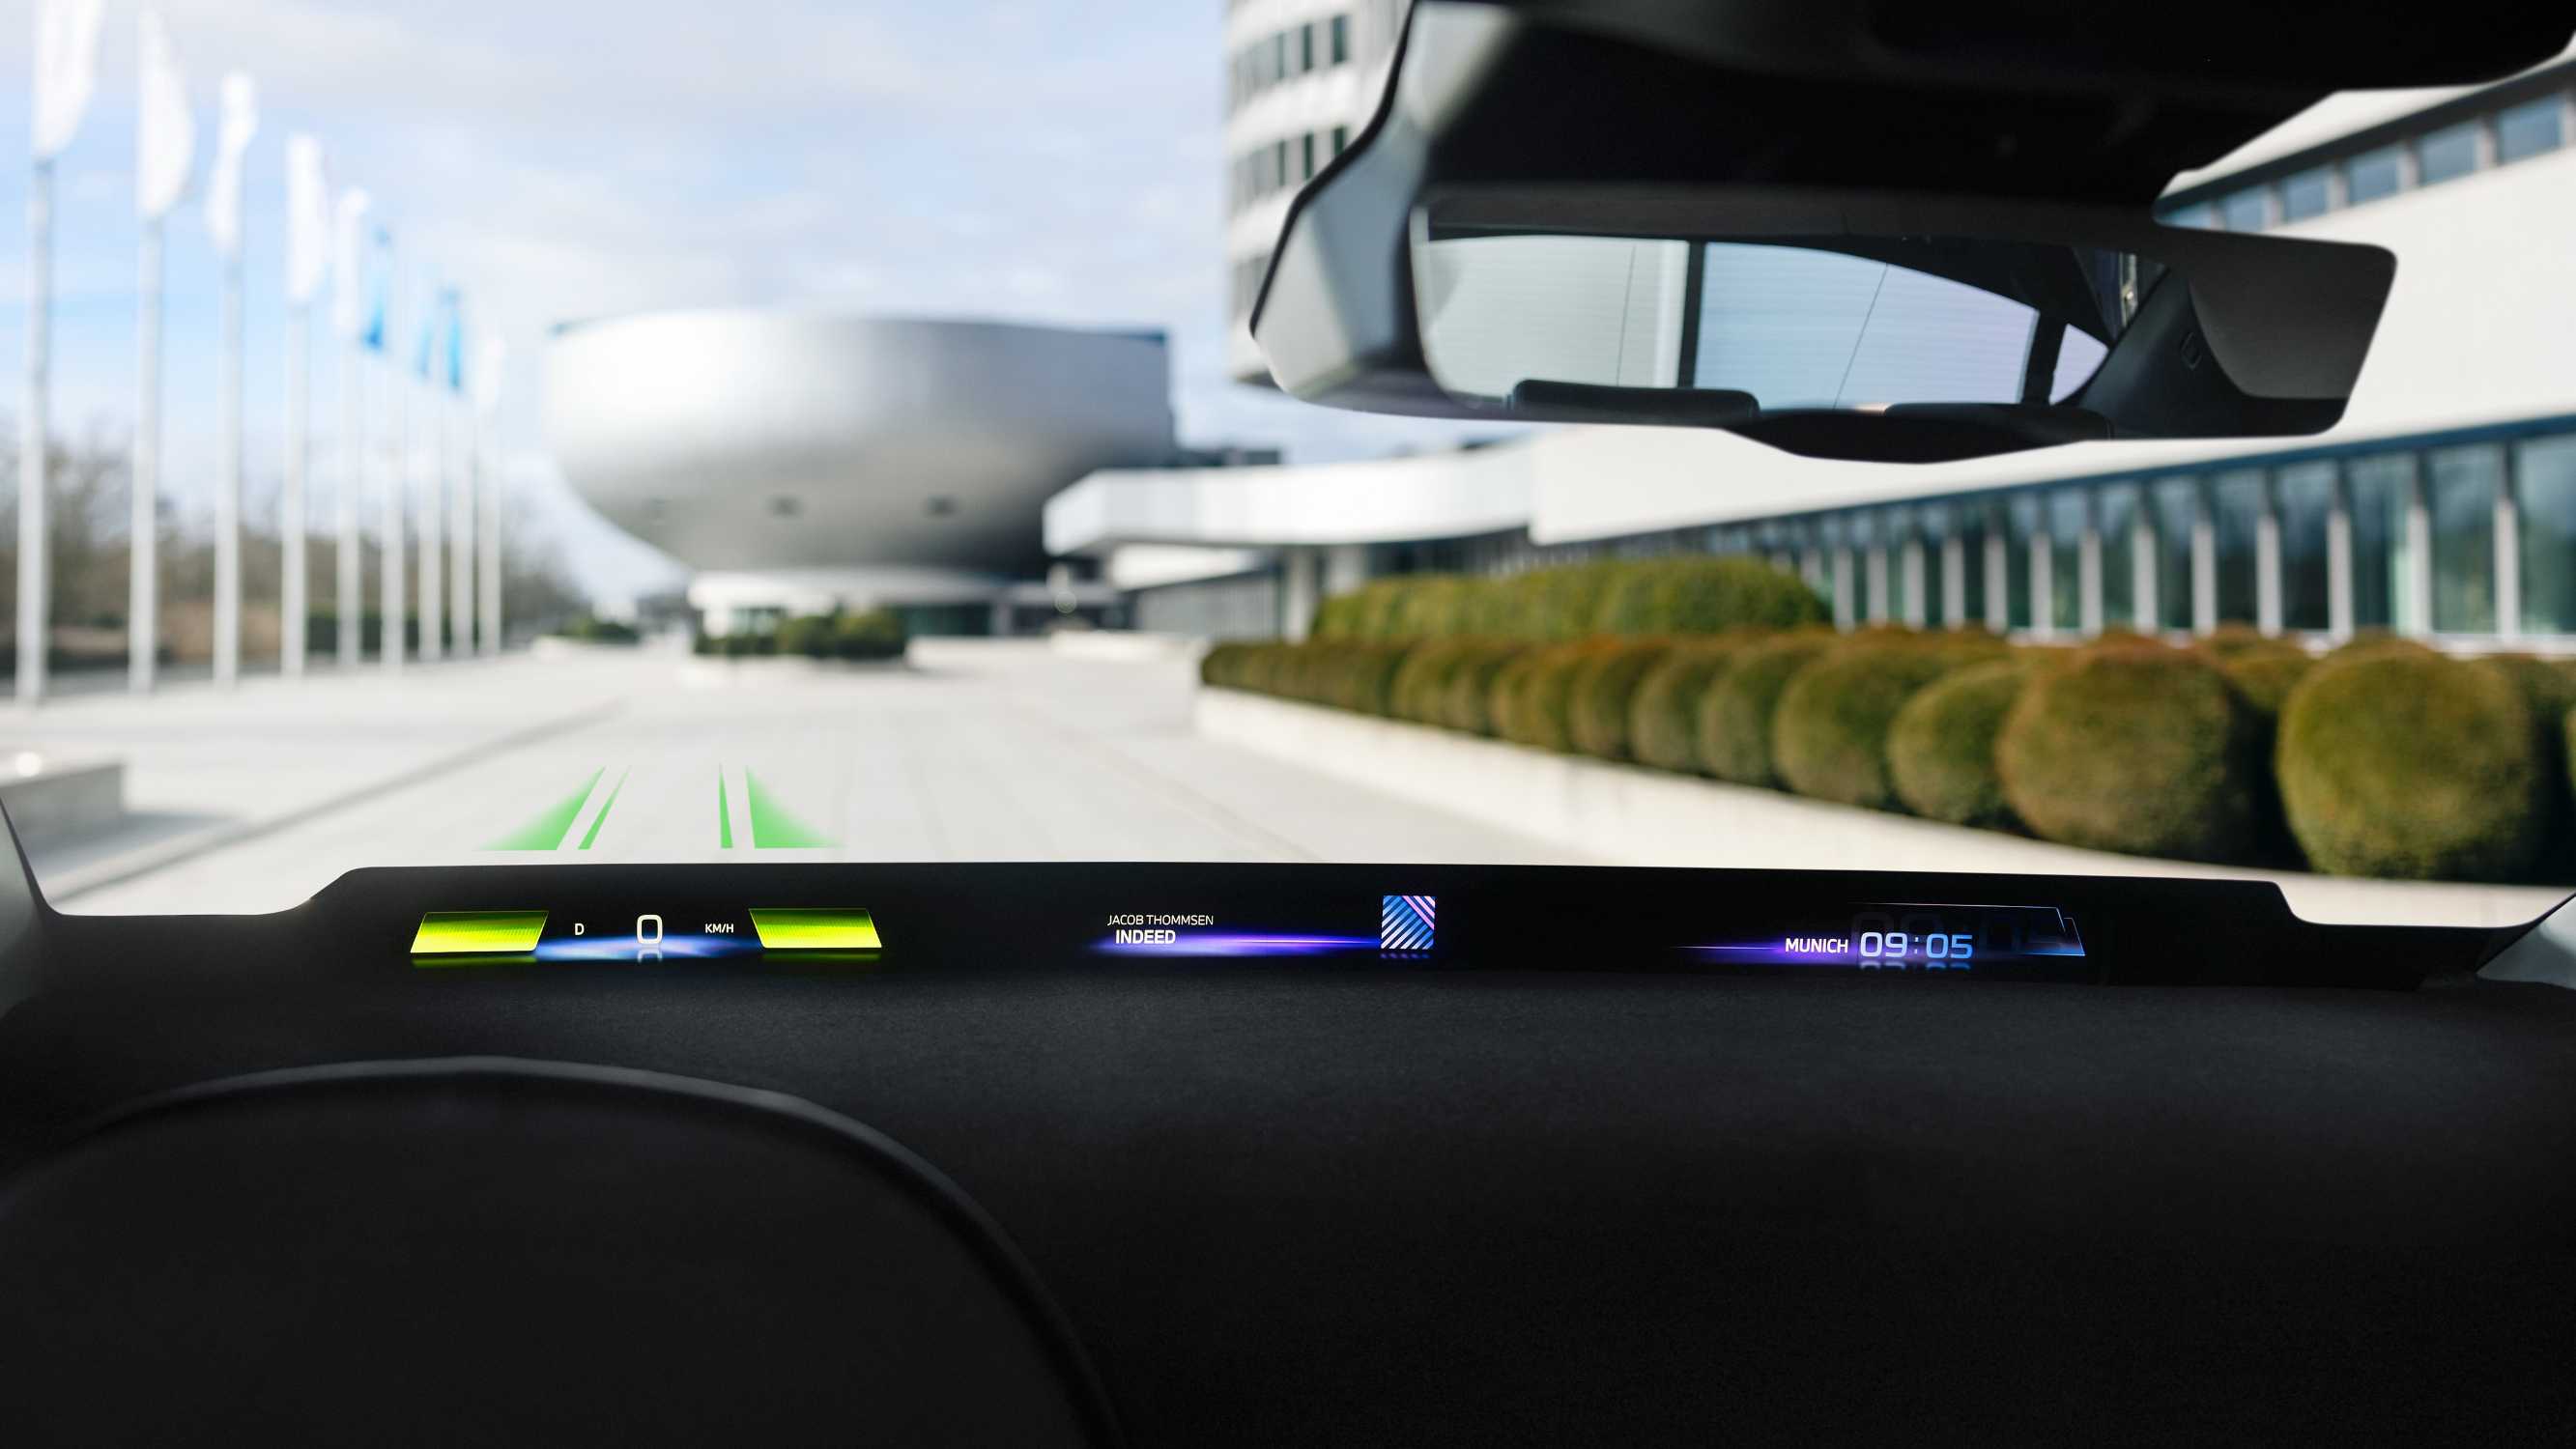 The BMW Panoramic Vision: New head-up display across the entire width of the windscreen will be in series production in 2025.